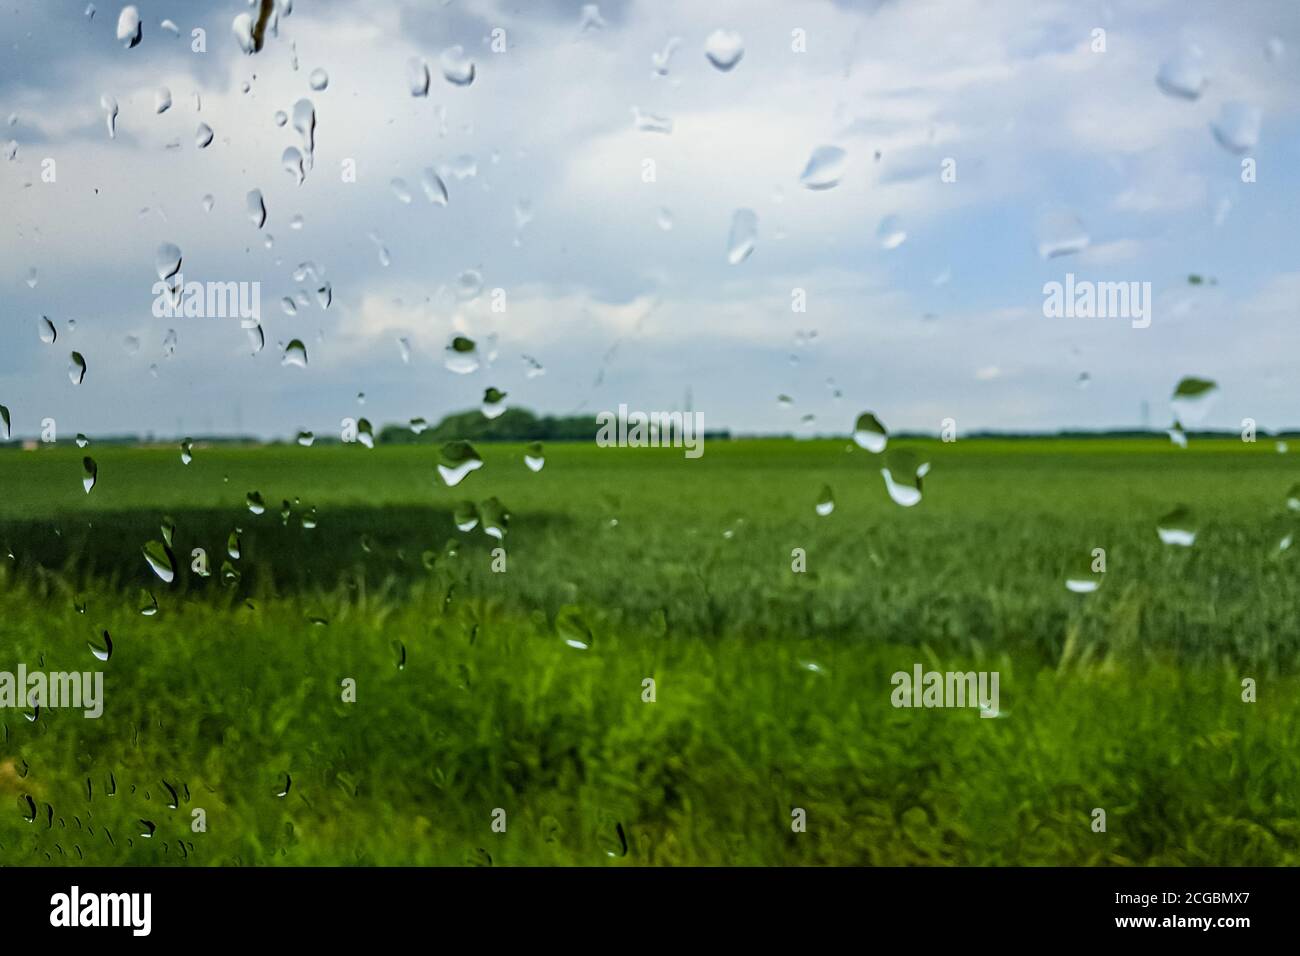 Drops of rain on glass on background of green field Stock Photo